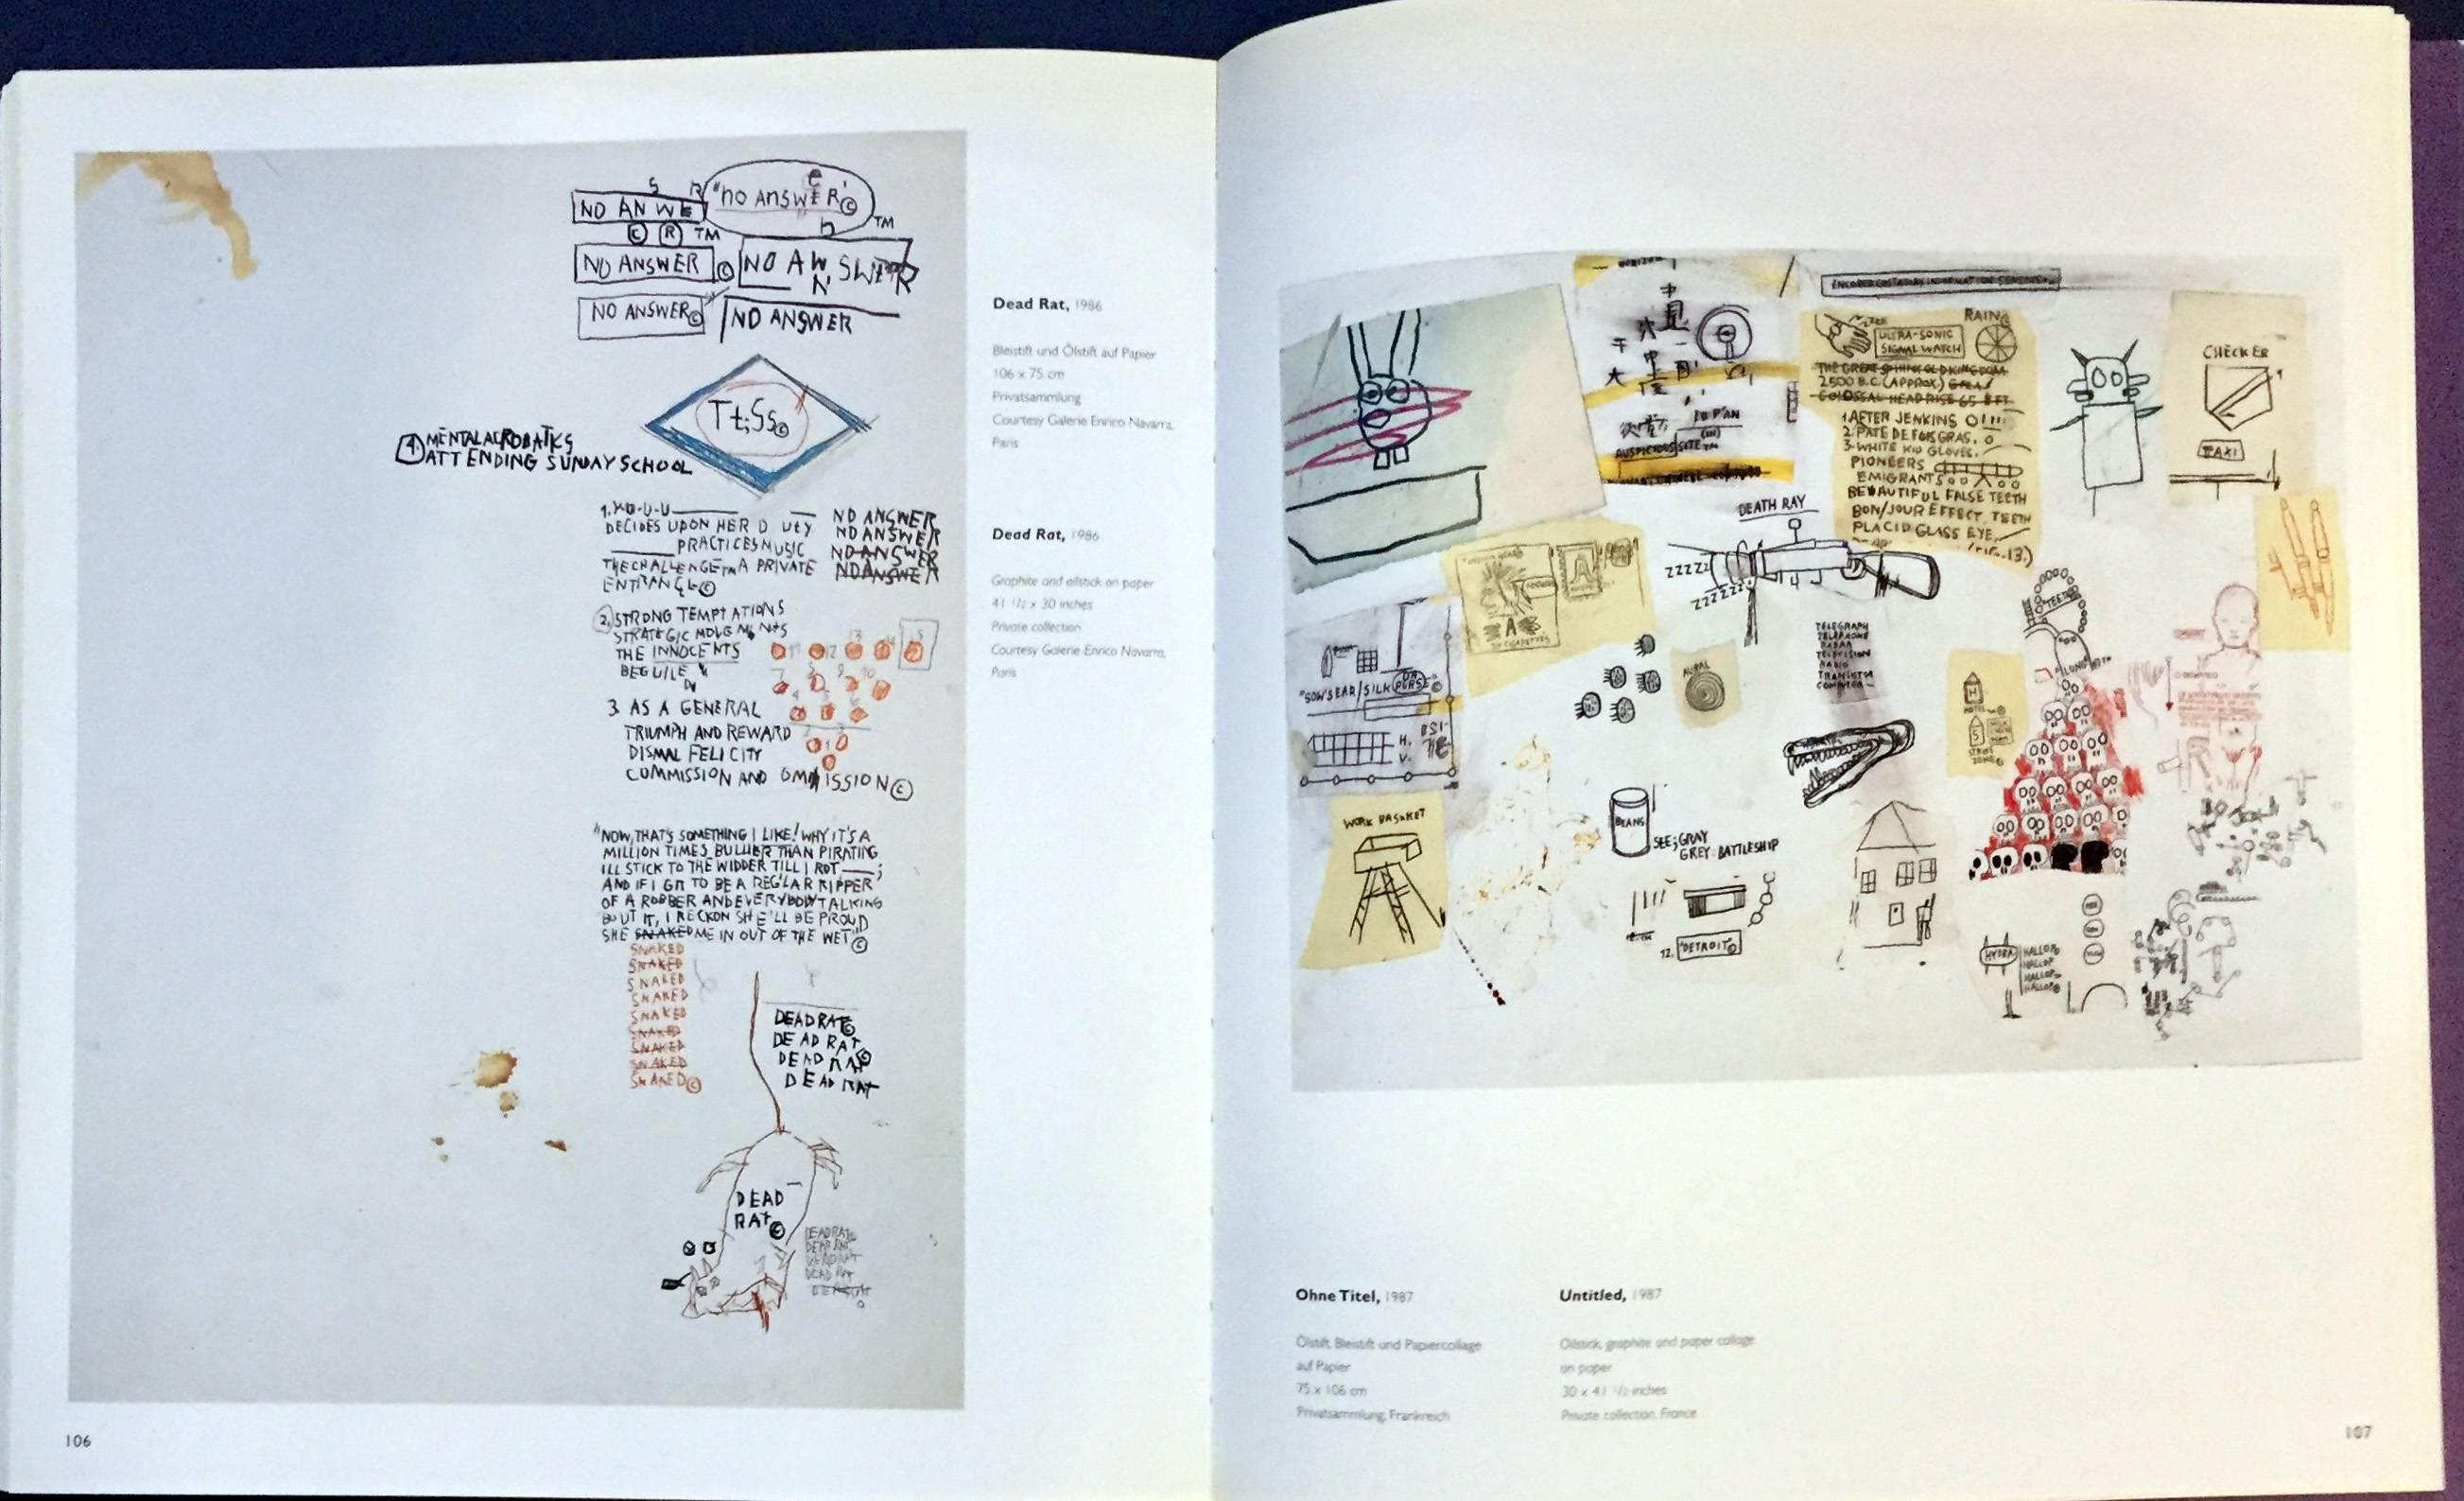 Jean Michel Basquiat Works on Paper, Werke Auf Papier
Published by Enrico Navarra, Paris (1999)
First Edition, 1999. 136 pages 
Excellent document of the artist's gallery works along with some very good photographs of the artist himself

Softcover.